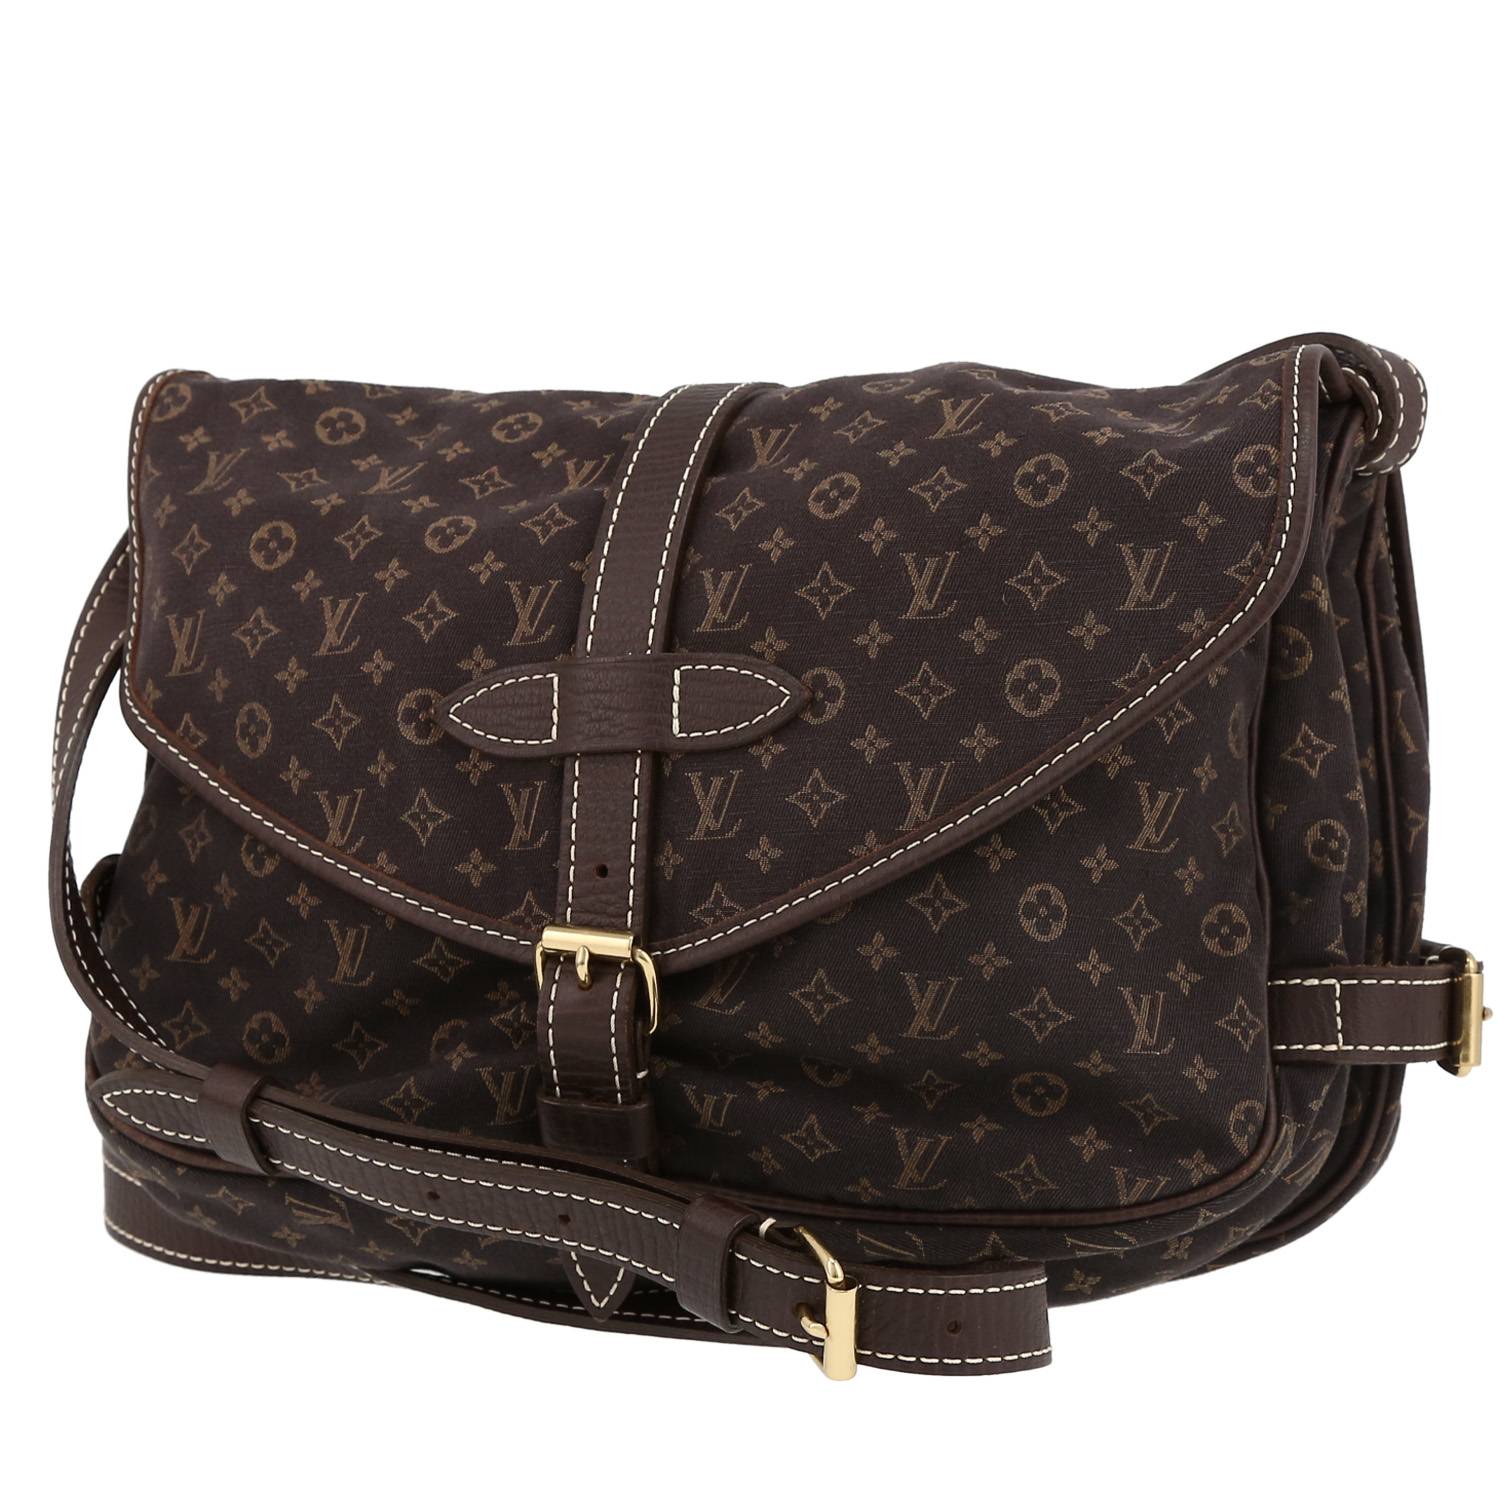 Louis Vuitton Saumur shoulder bag in brown monogram canvas Idylle and brown  leather